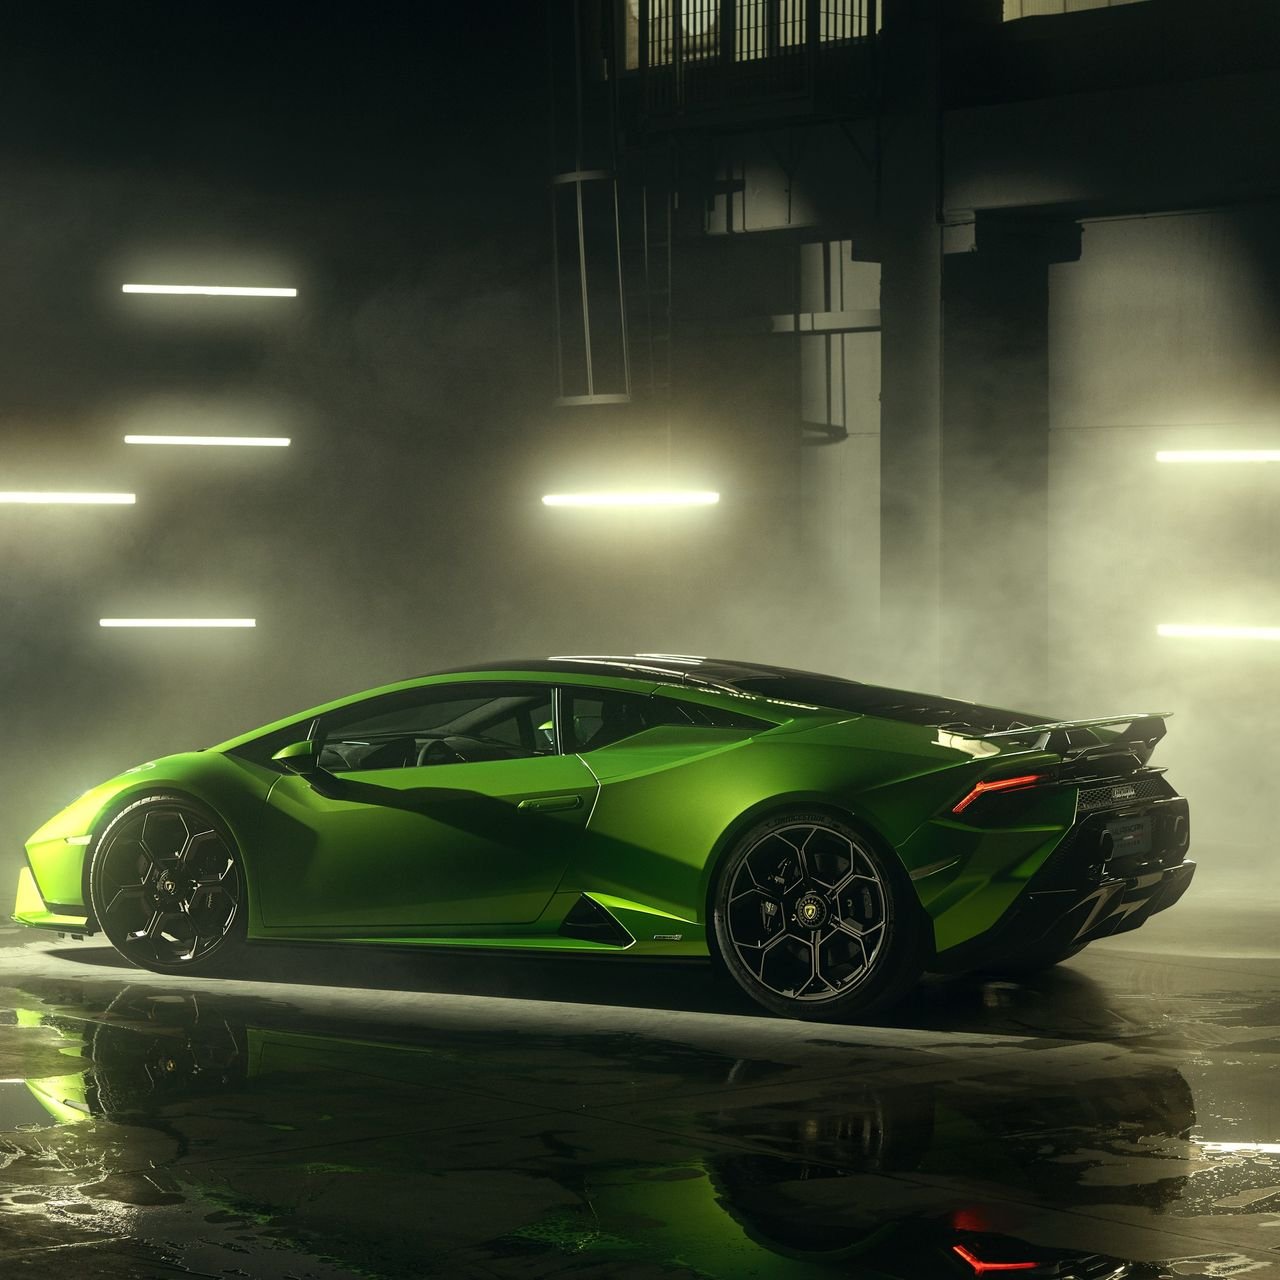 The Lamborghini Huracan Sterrato is a supercar that was built to go rally racing